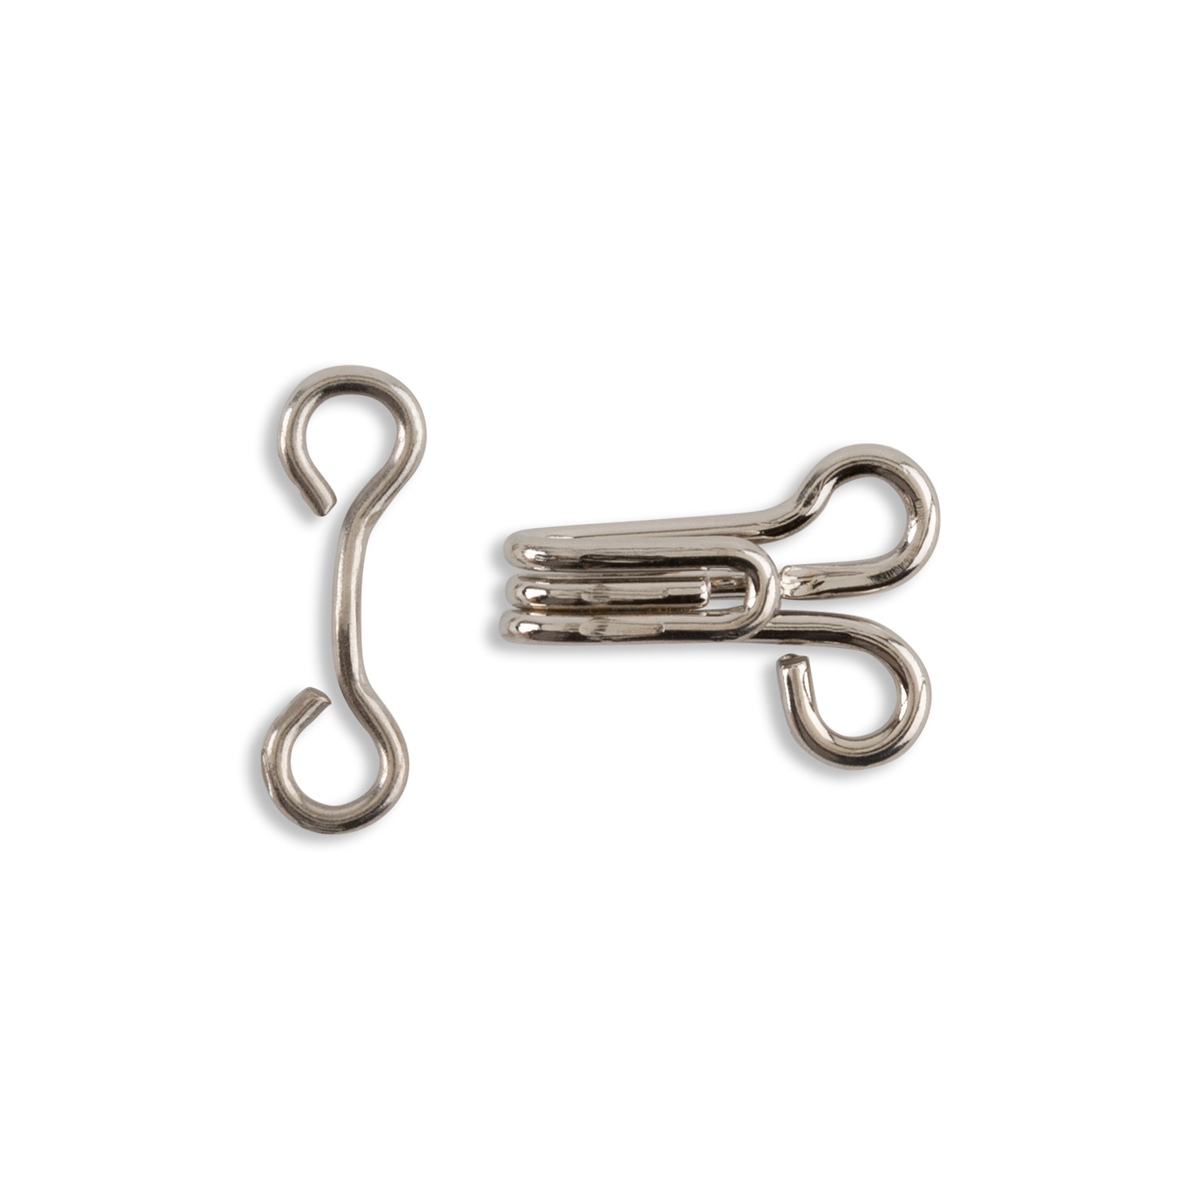 All-in-one Hook and Eye Clasp Sets